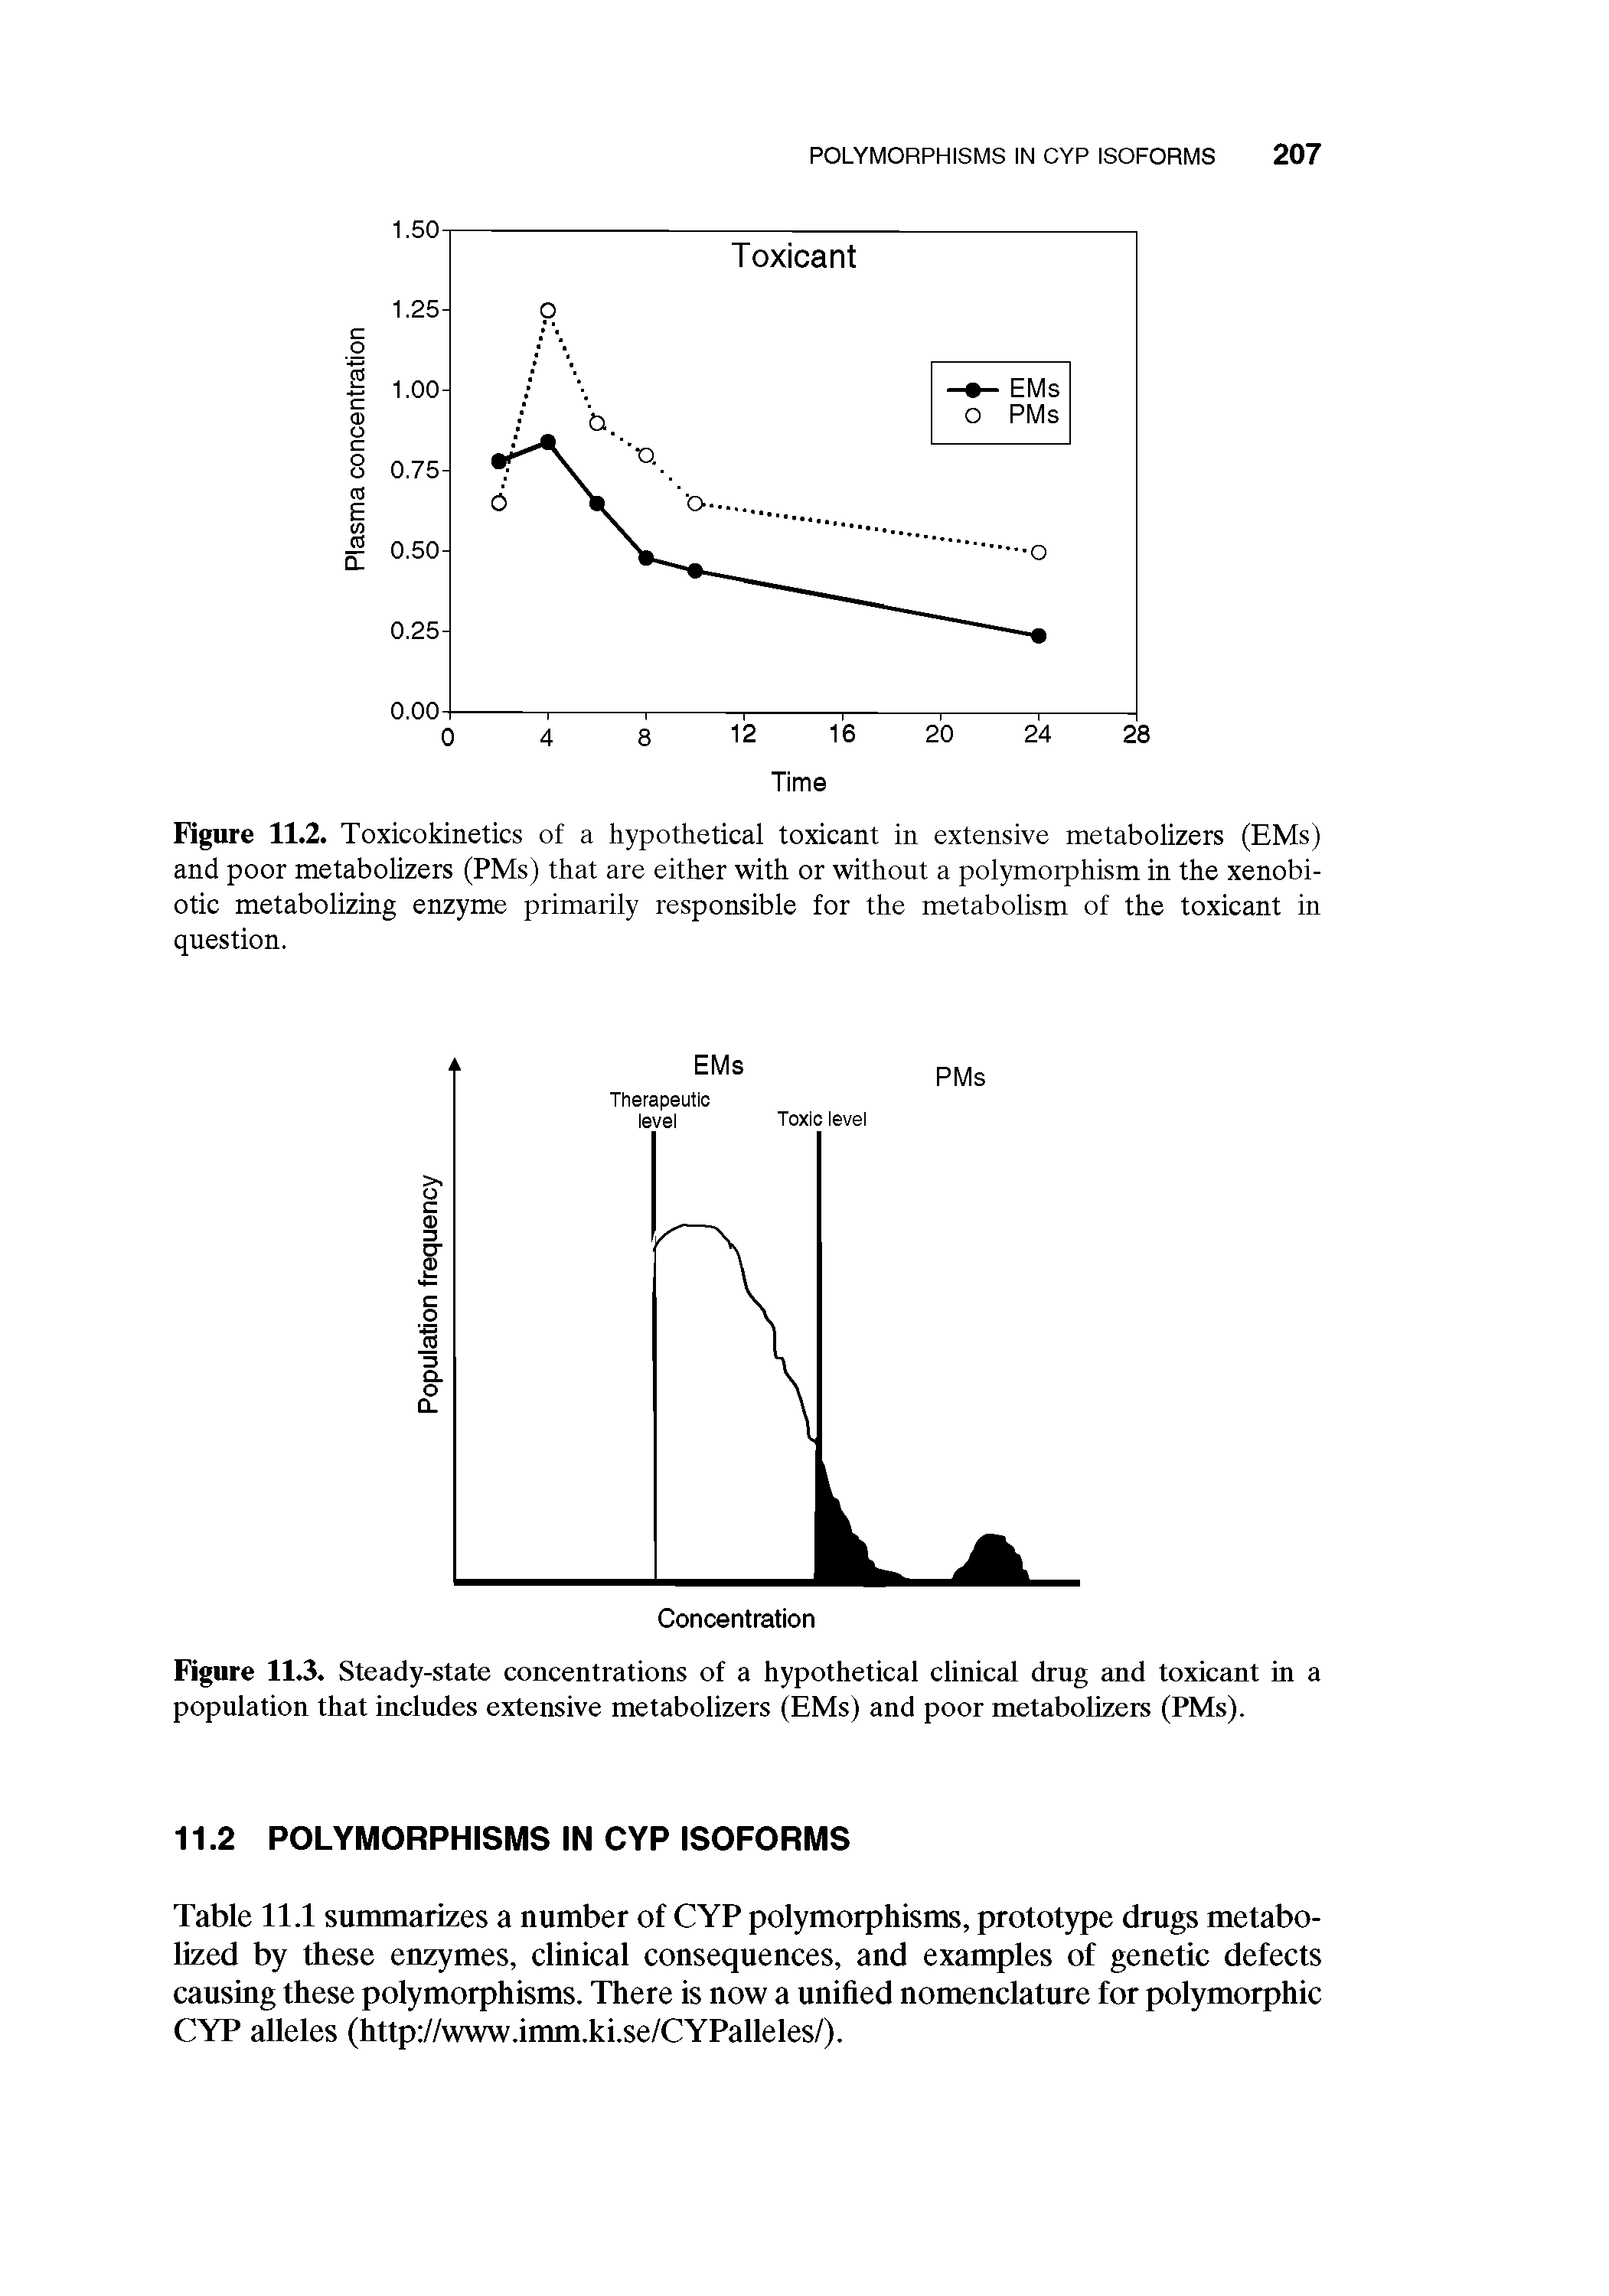 Figure 11.3. Steady-state concentrations of a hypothetical clinical drug and toxicant in a population that includes extensive metabolizers (EMs) and poor metabolizers (PMs).